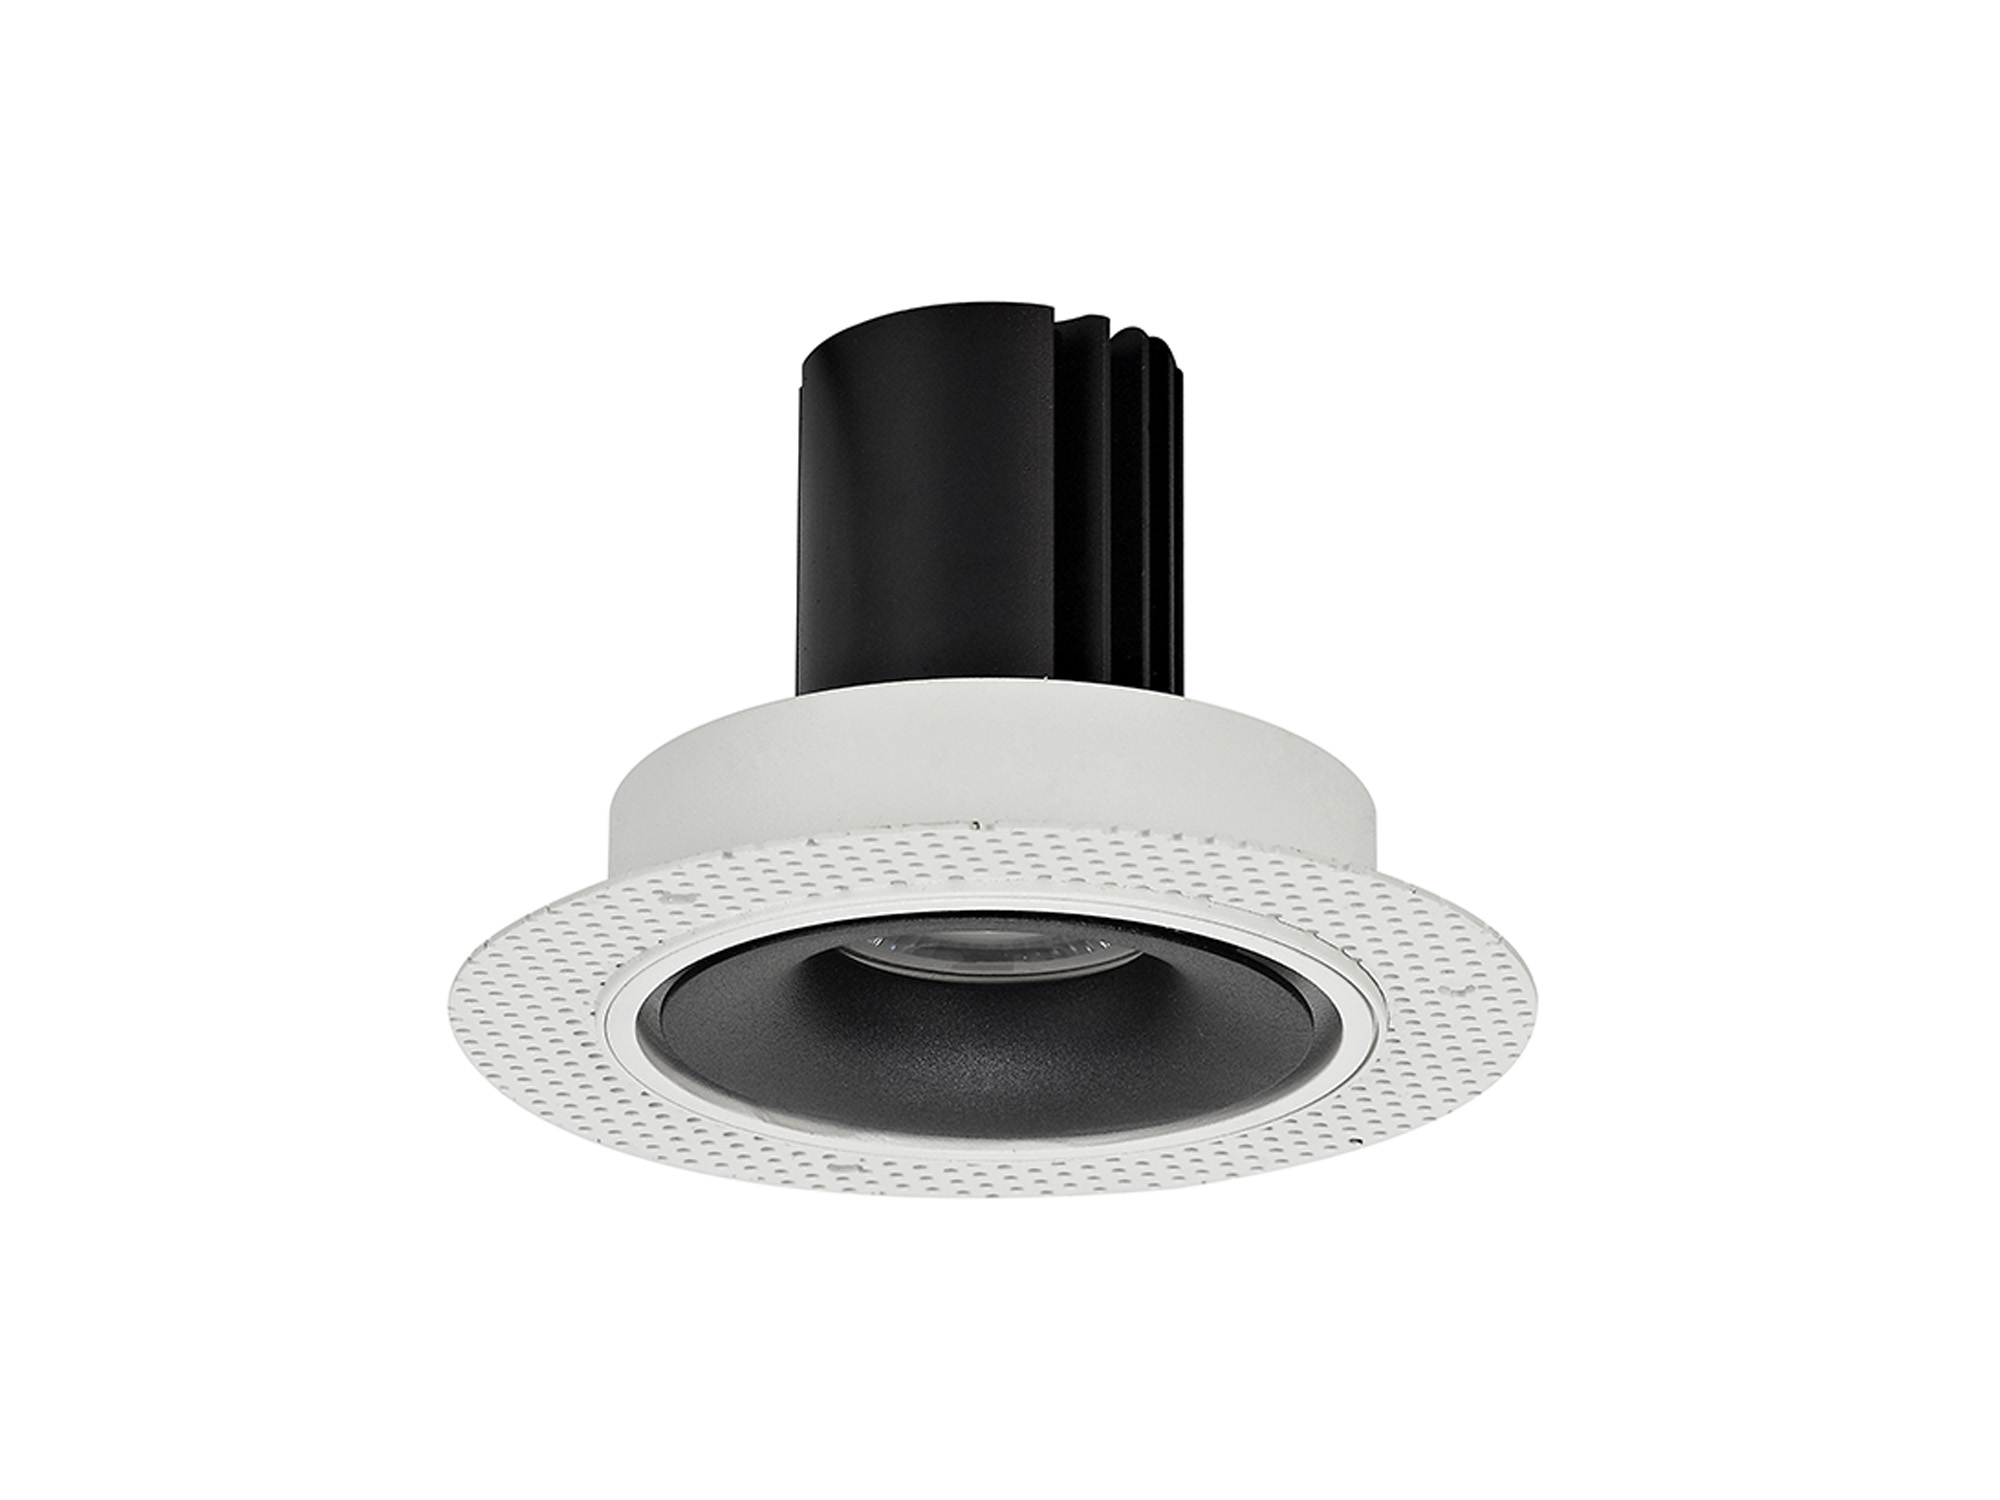 DM202171  Bolor T 12 Tridonic Powered 12W 2700K 1200lm 12° CRI>90 LED Engine White/Black Trimless Fixed Recessed Spotlight; IP20